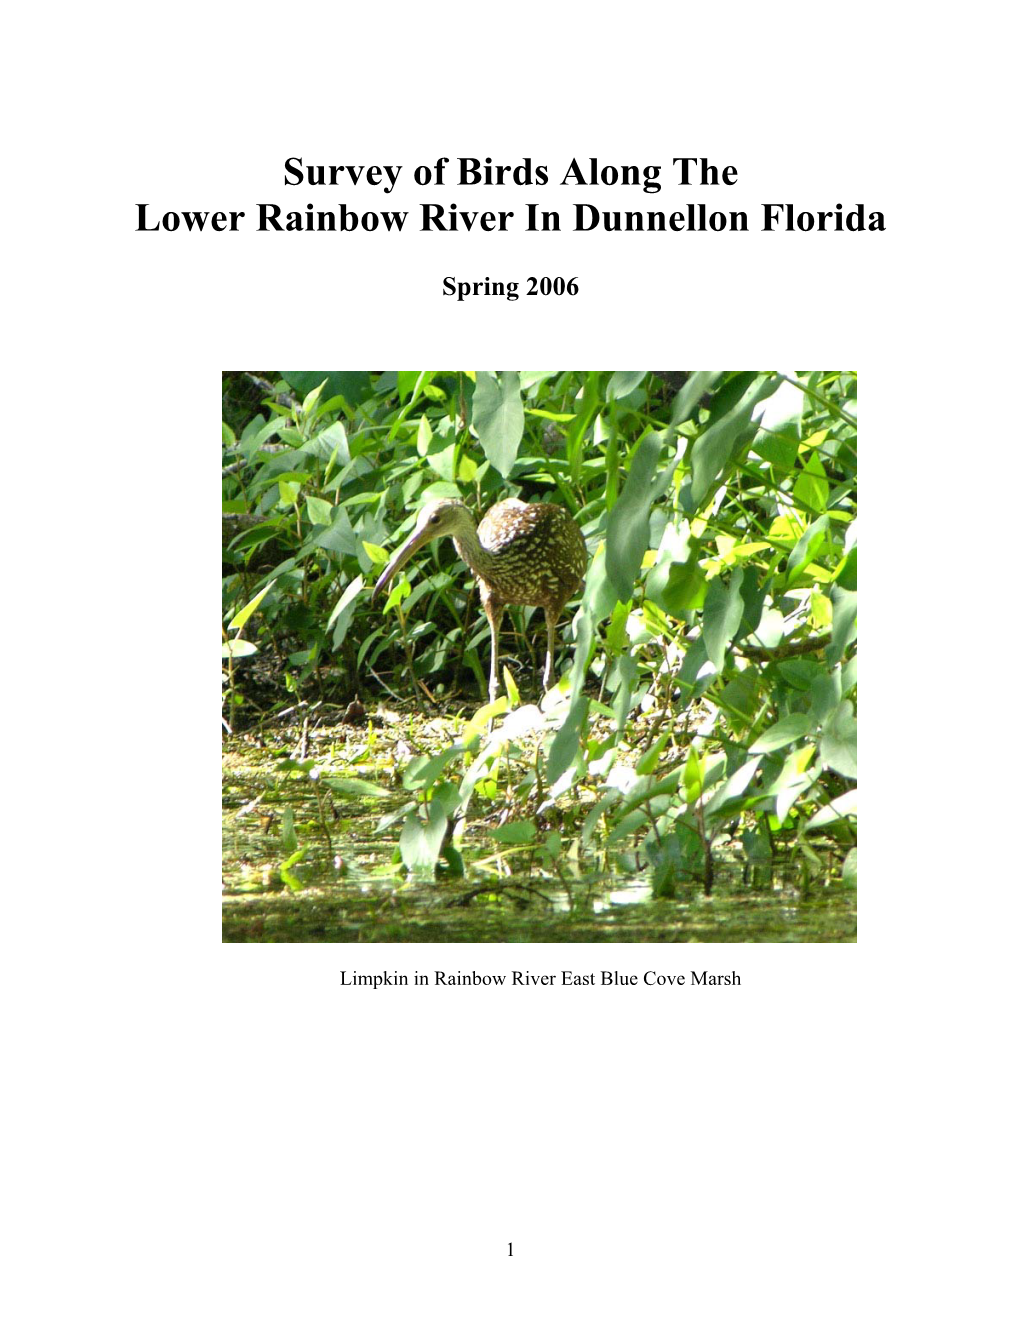 Survey of Birds on the Lower Rainbow River in Dunnellon Florida